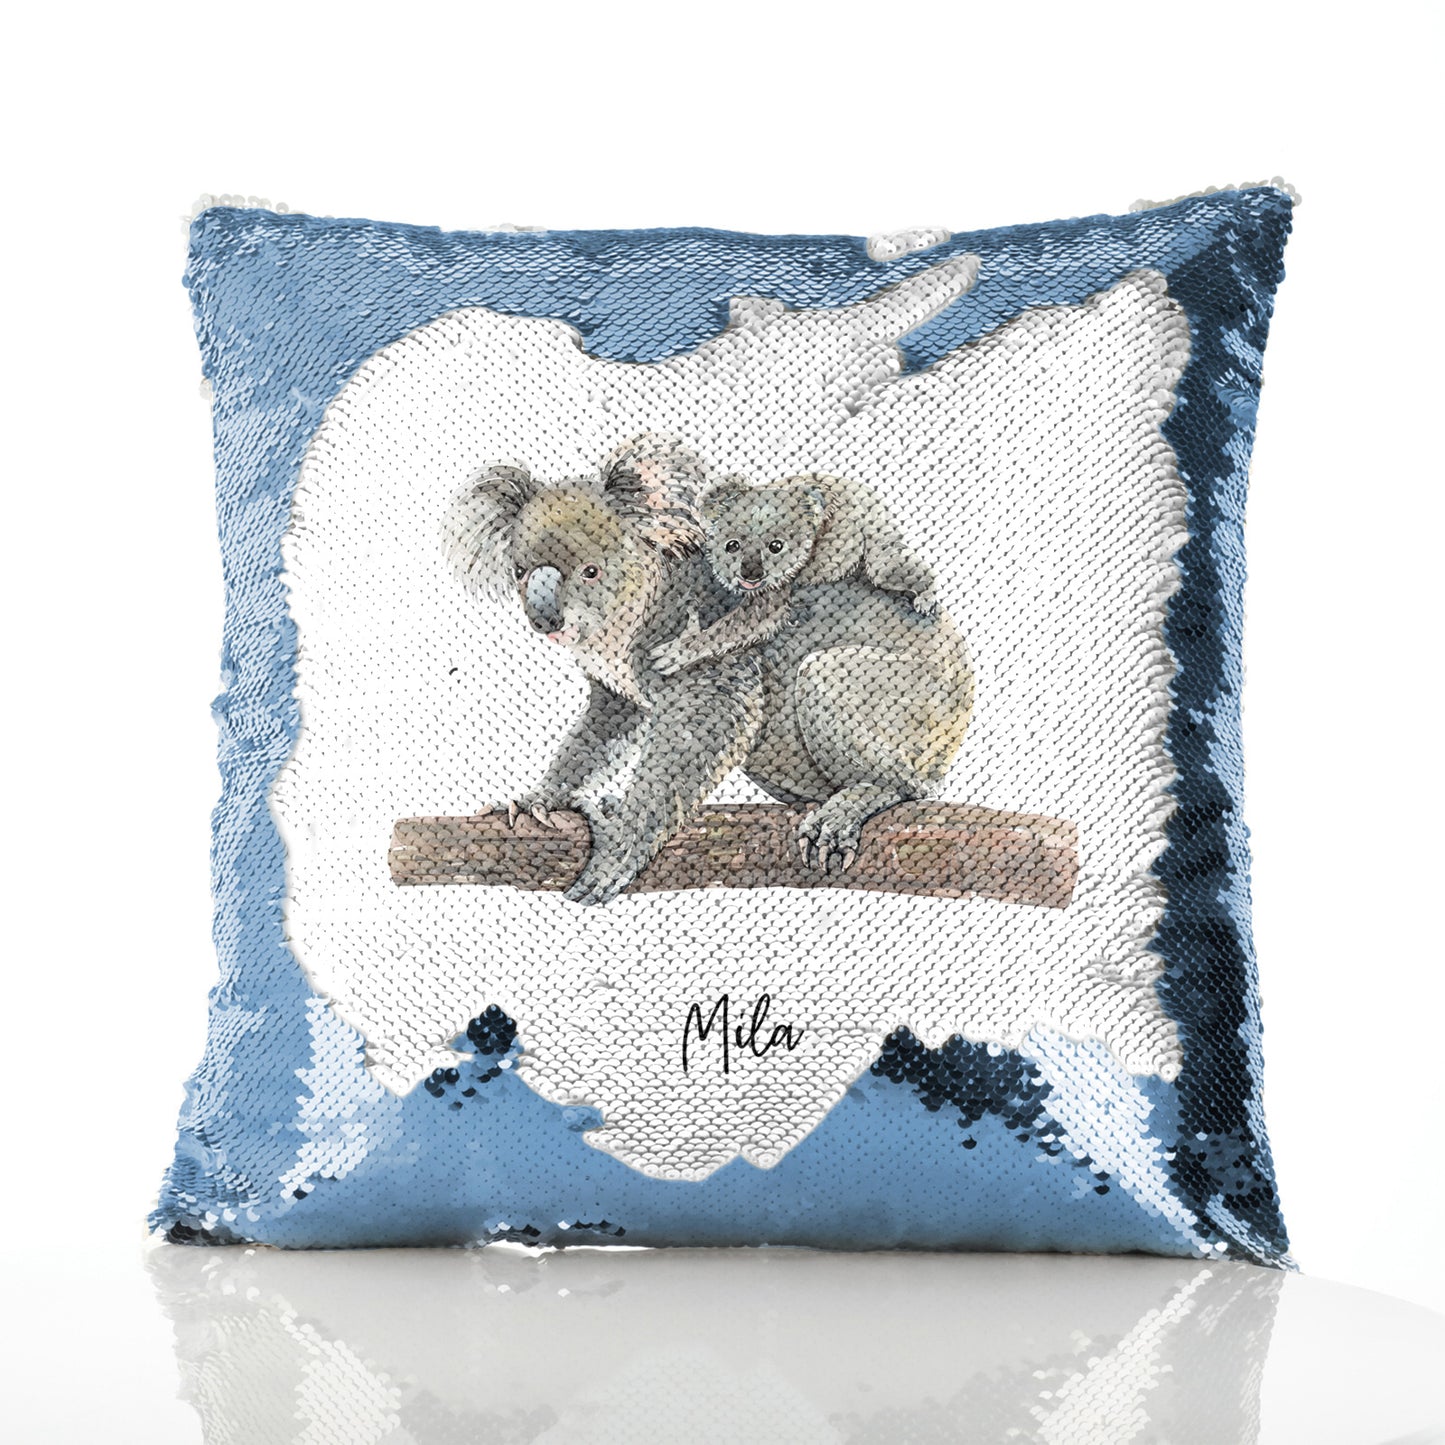 Personalised Sequin Cushion with Welcoming Text and Embracing Mum and Baby Koalas